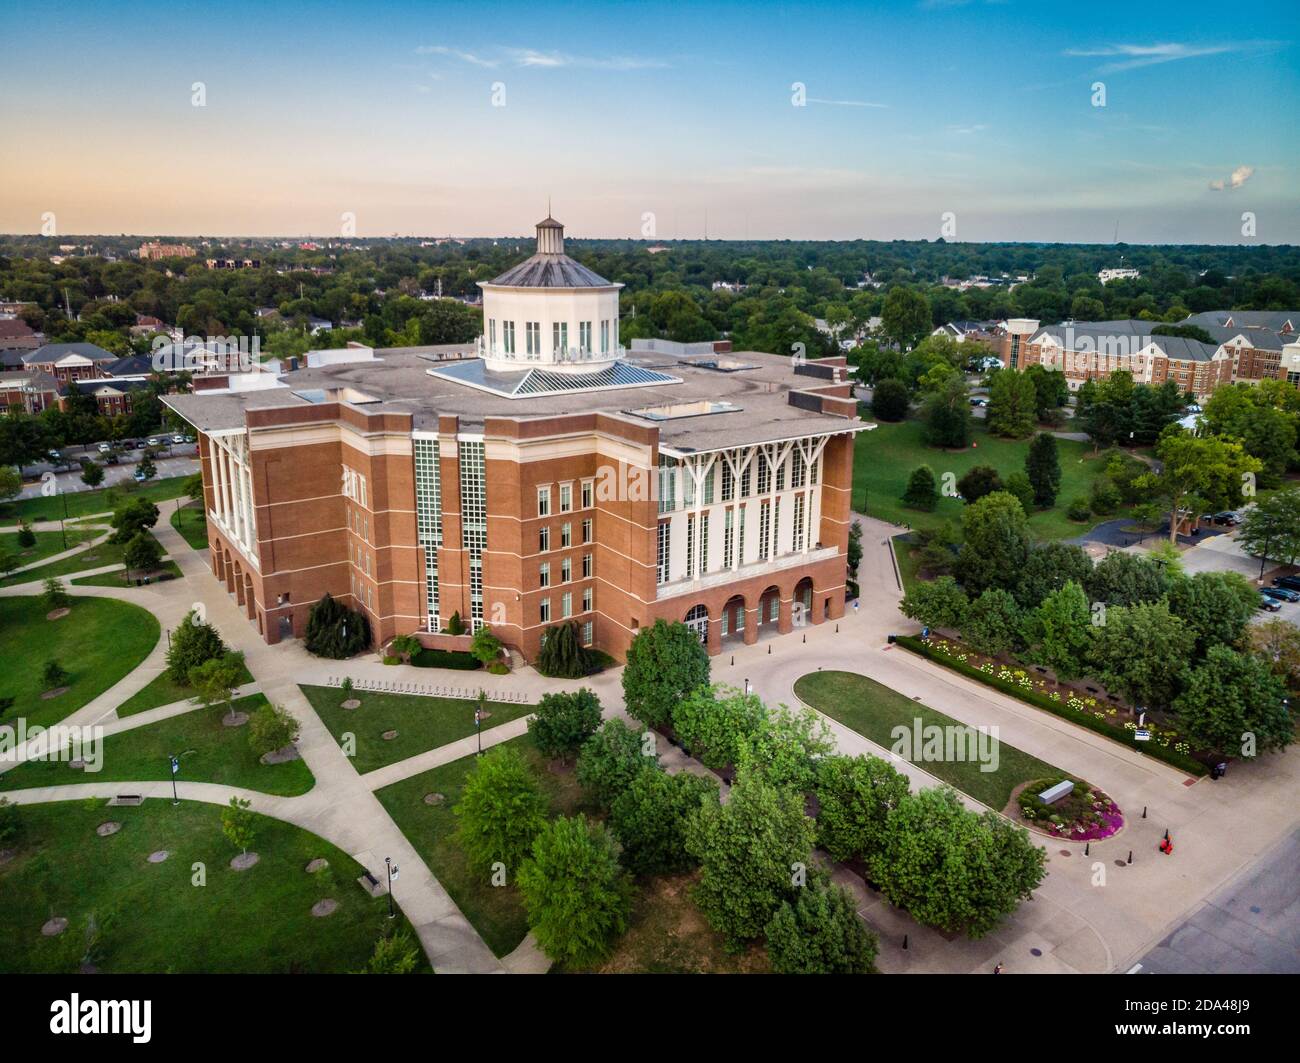 Lexington, Kentucky, August 9, 2020: Aerial  view of the William T. Young Library at the University of Kentucky in Lexington, Kentucky Stock Photo